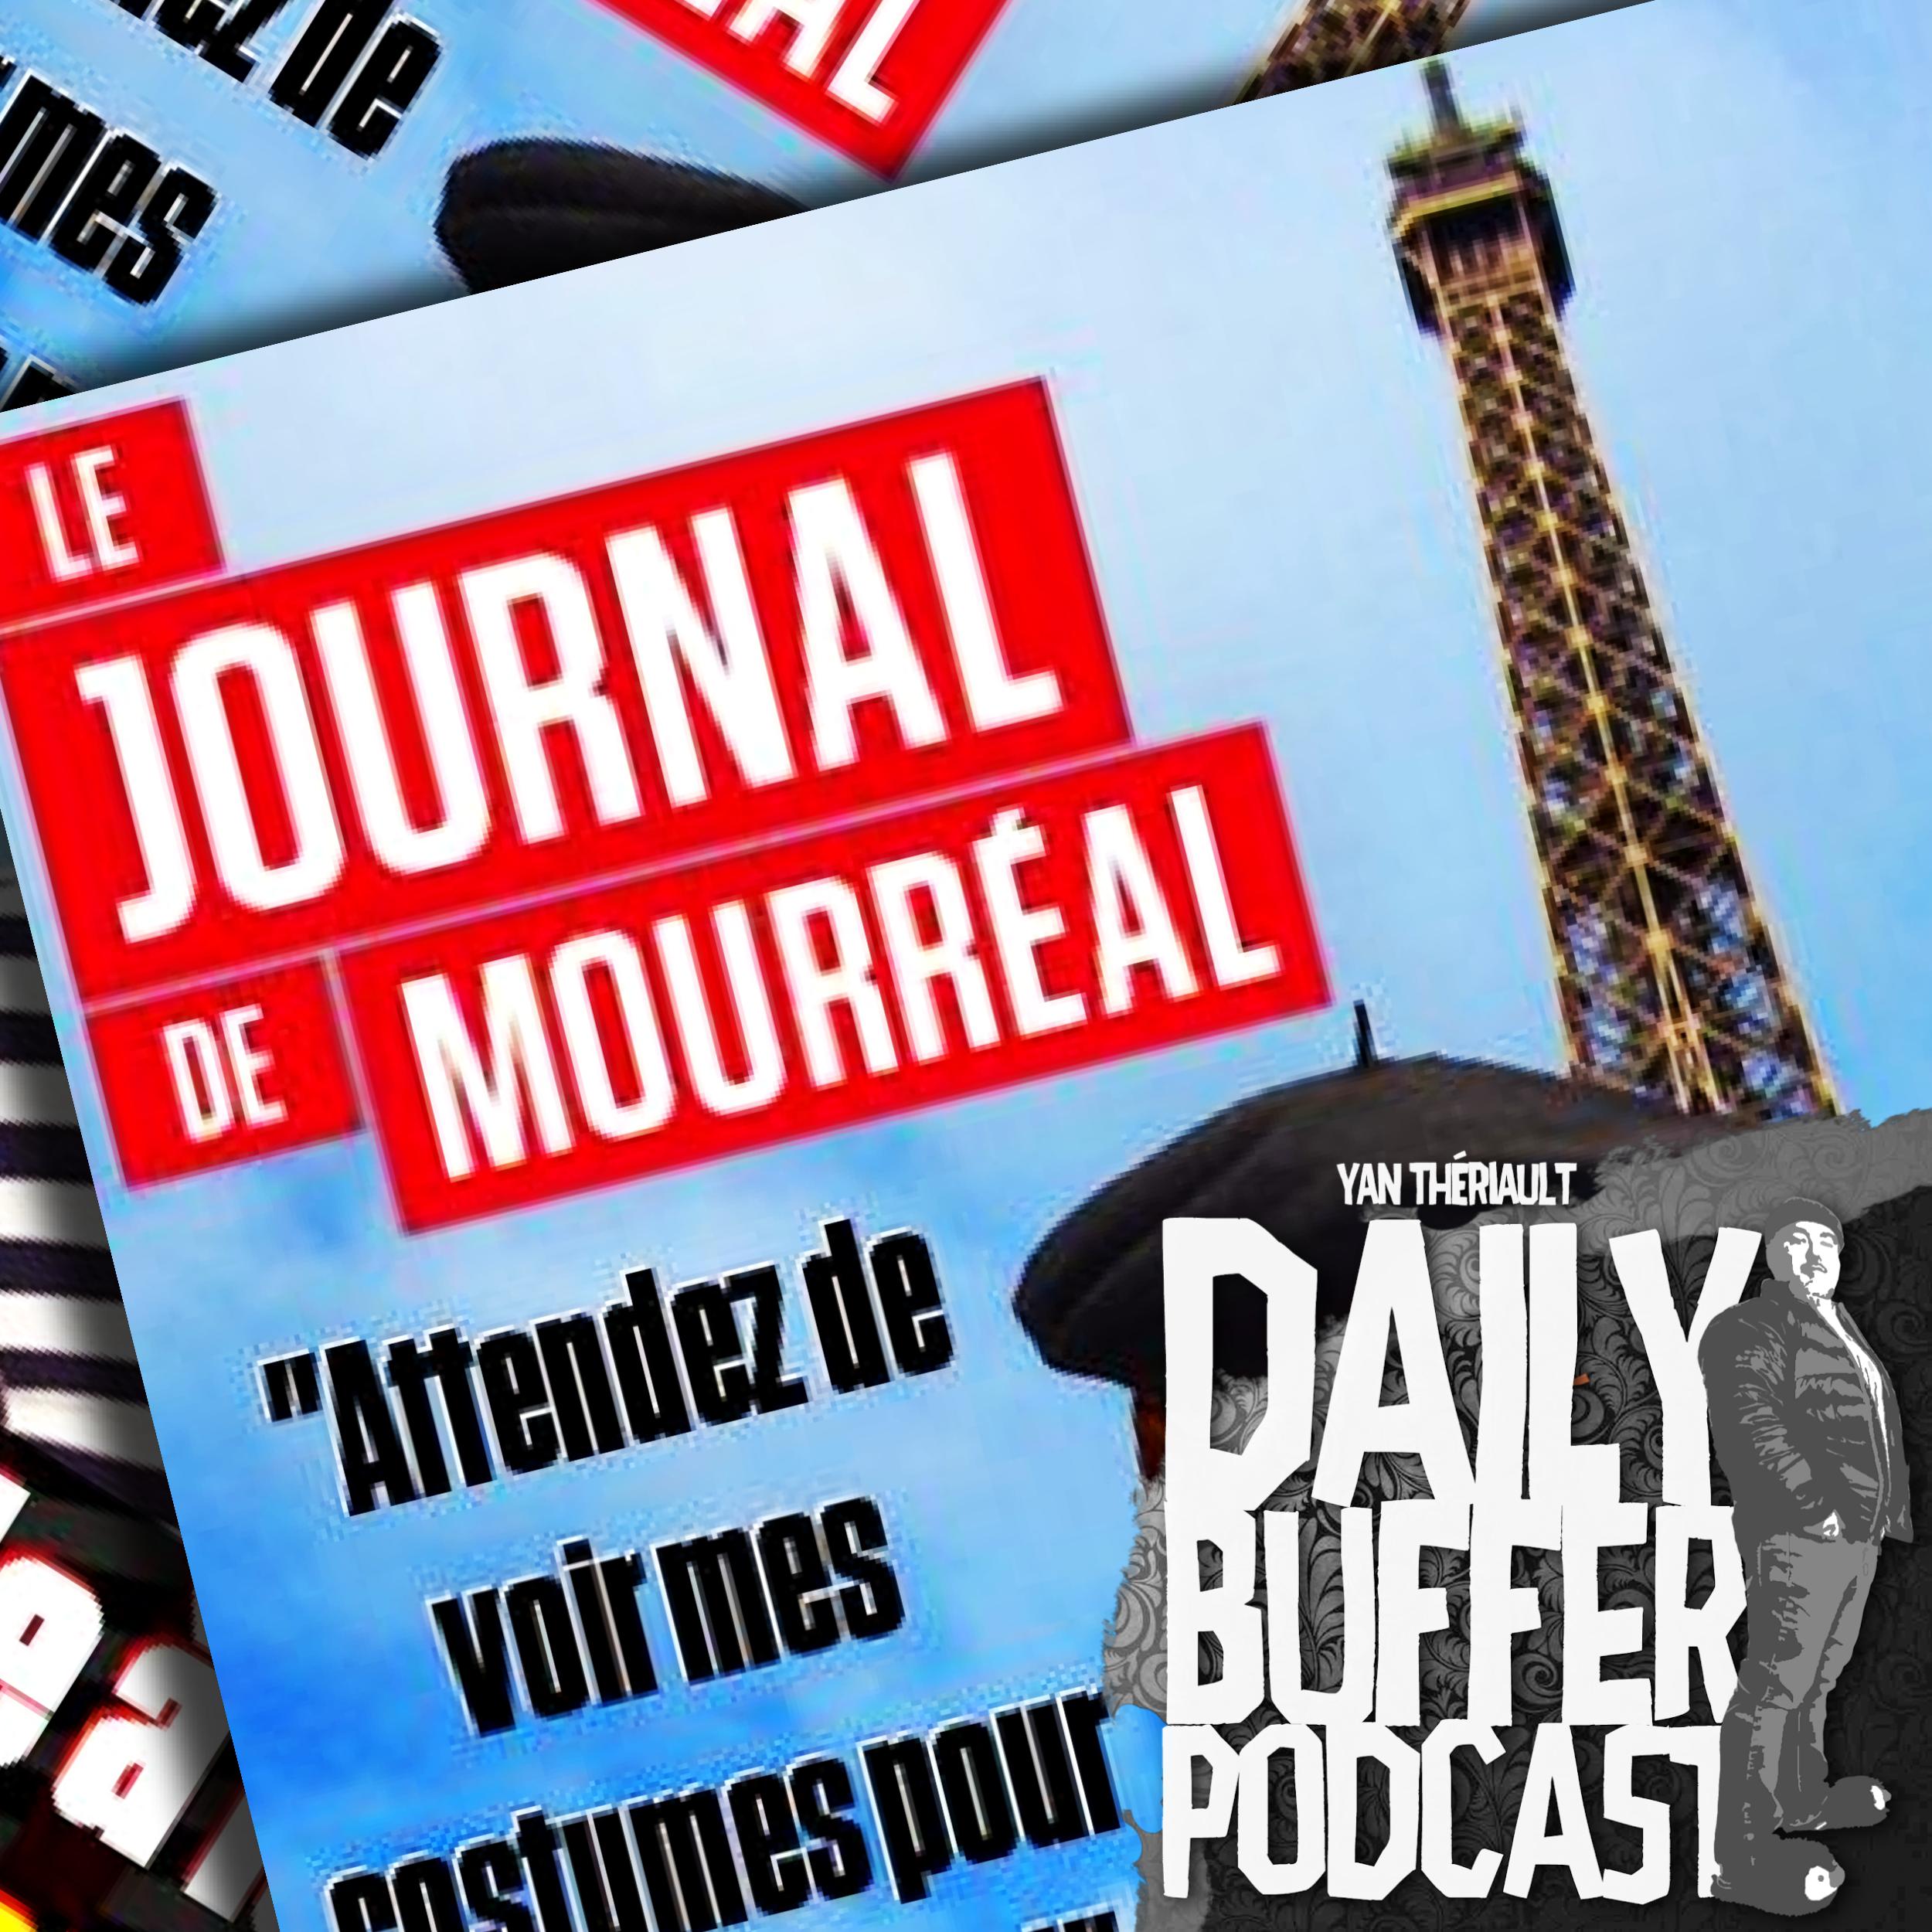 Le Journal de Mourreal - Le Daily Buffer Podcast - 2019 05 23